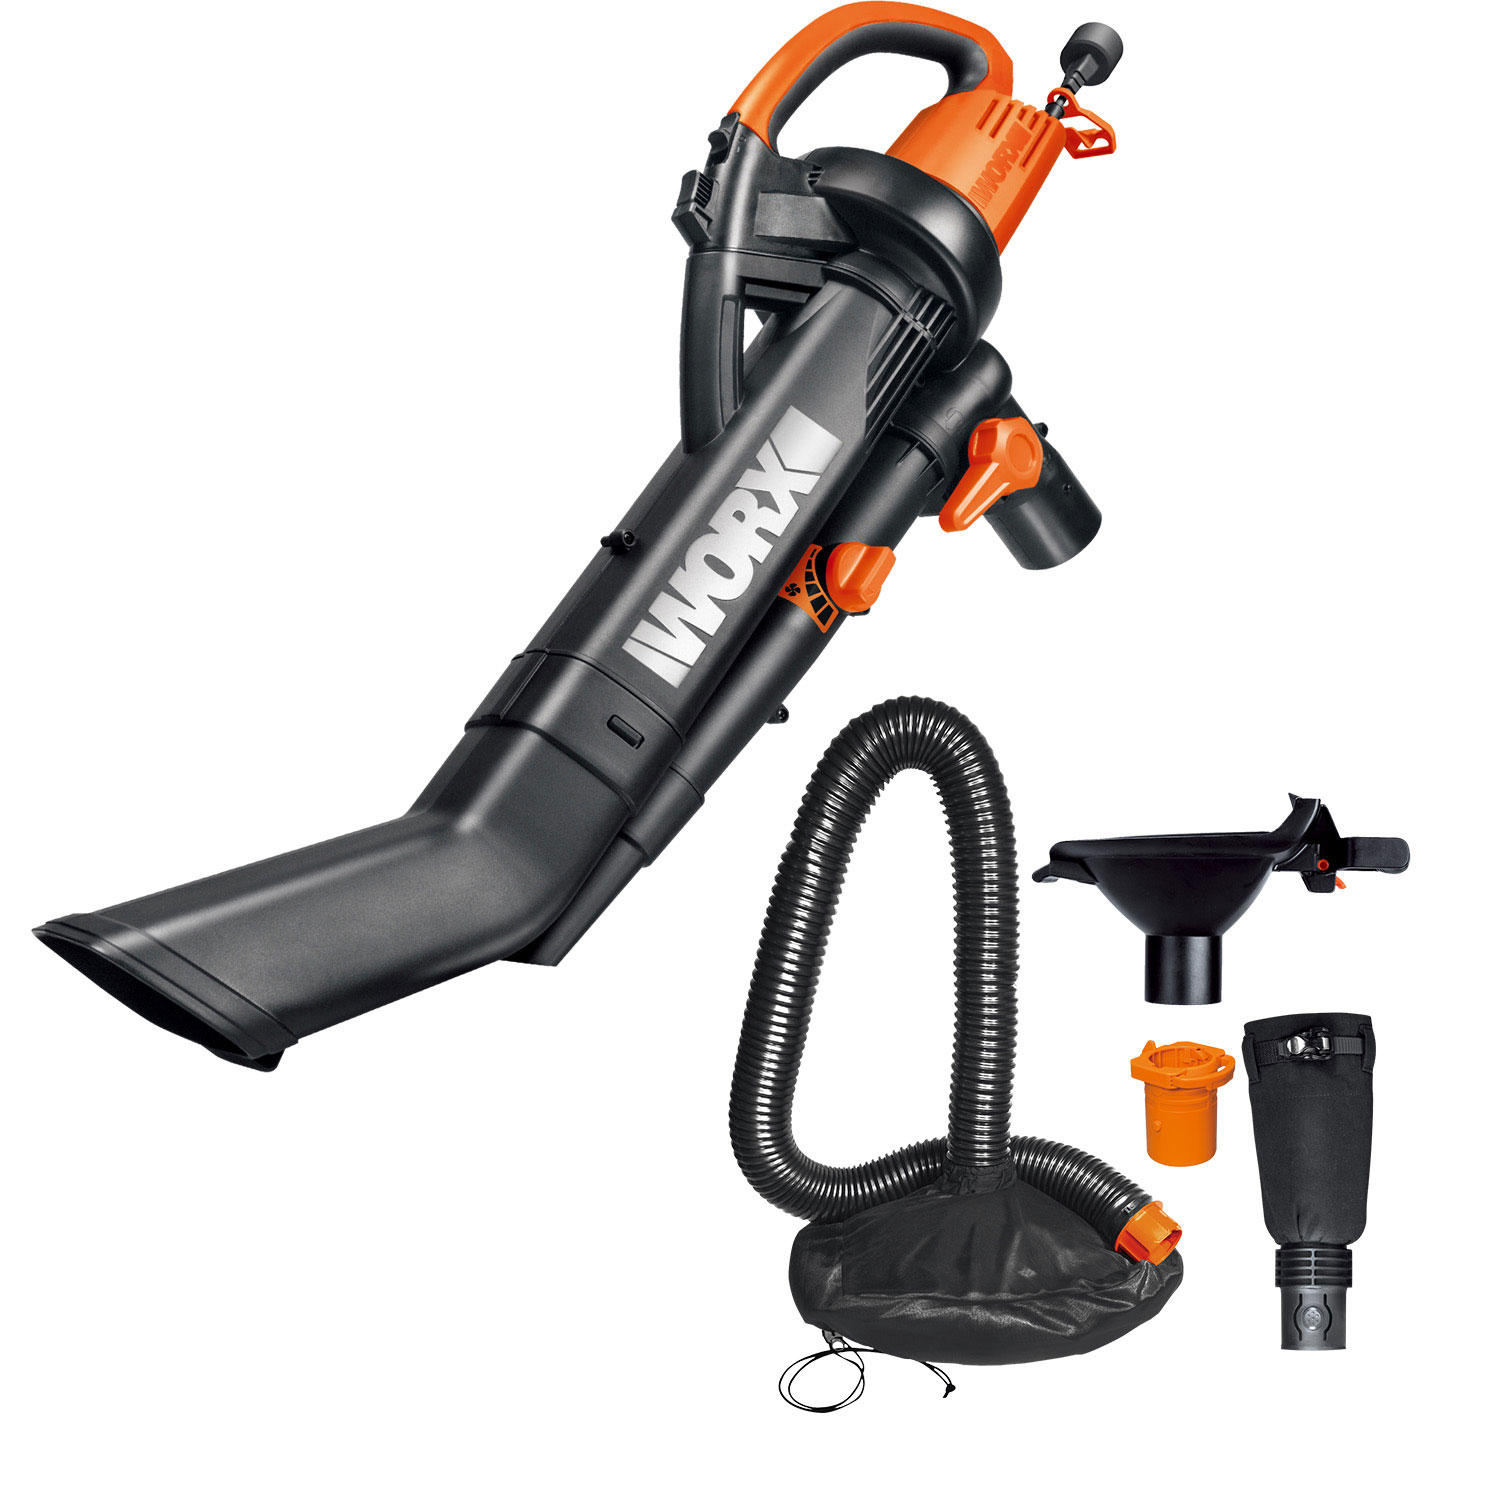 Worx TRIVAC 12 Amp 3-in-1 Blower/Mulcher/ Vacuum with LEAFPRO Collection System